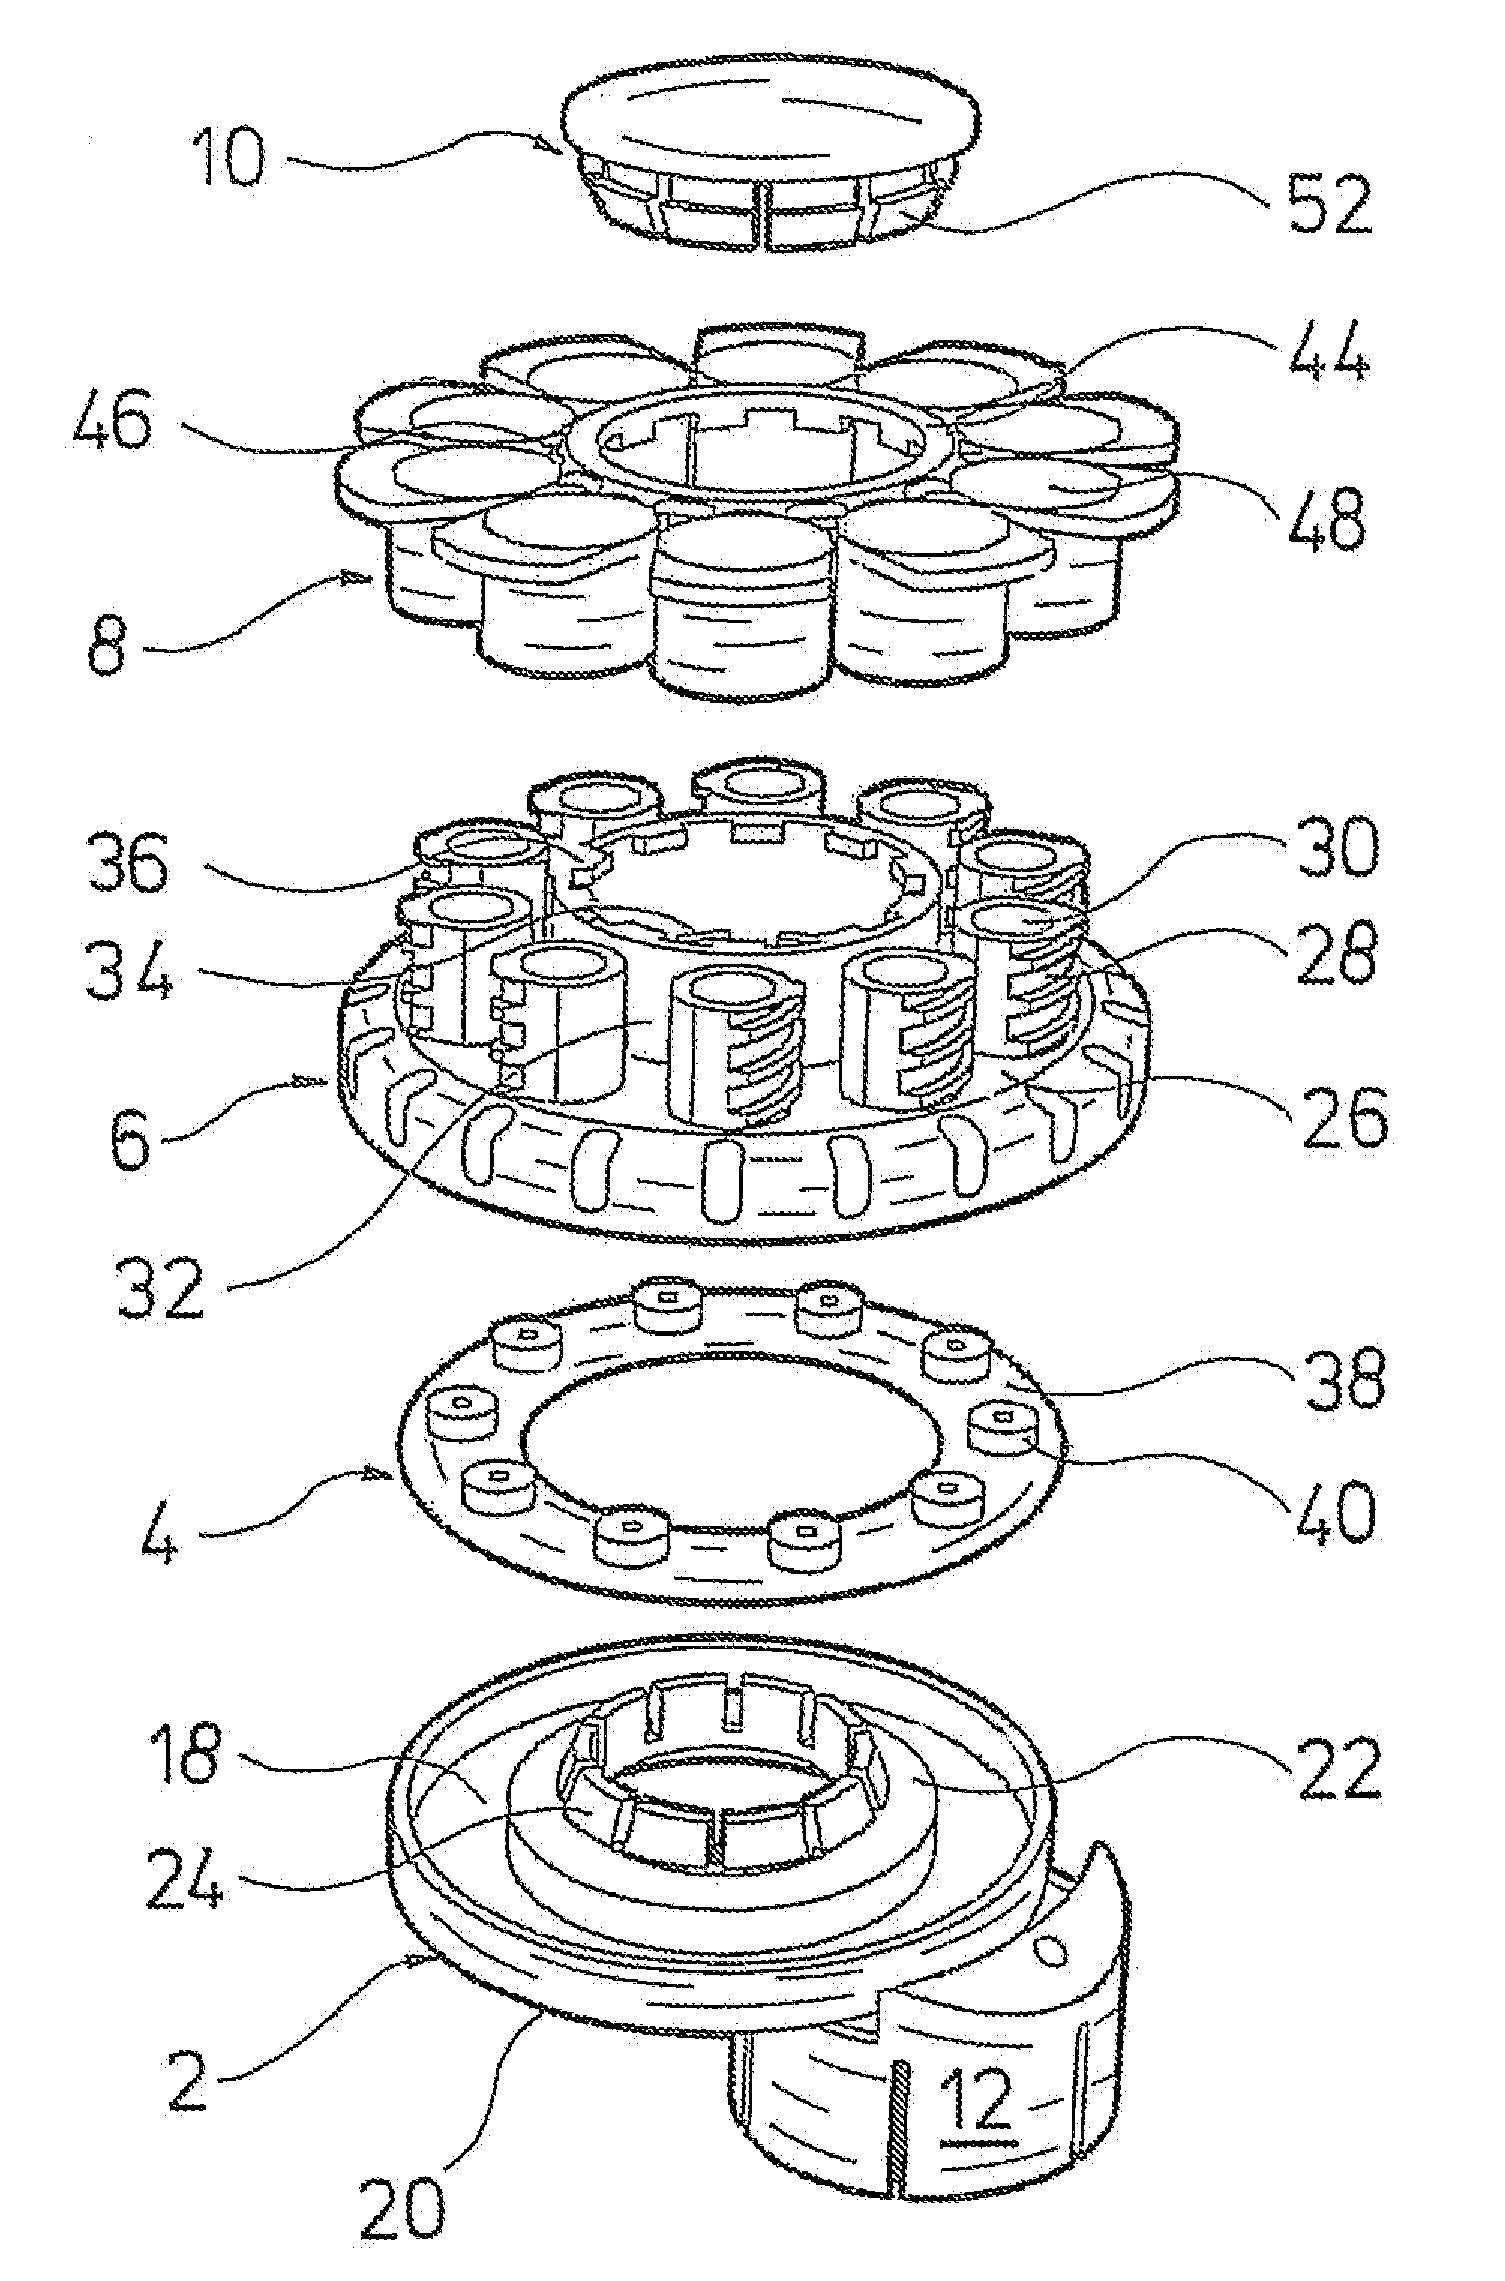 Device for the extraction of liquids